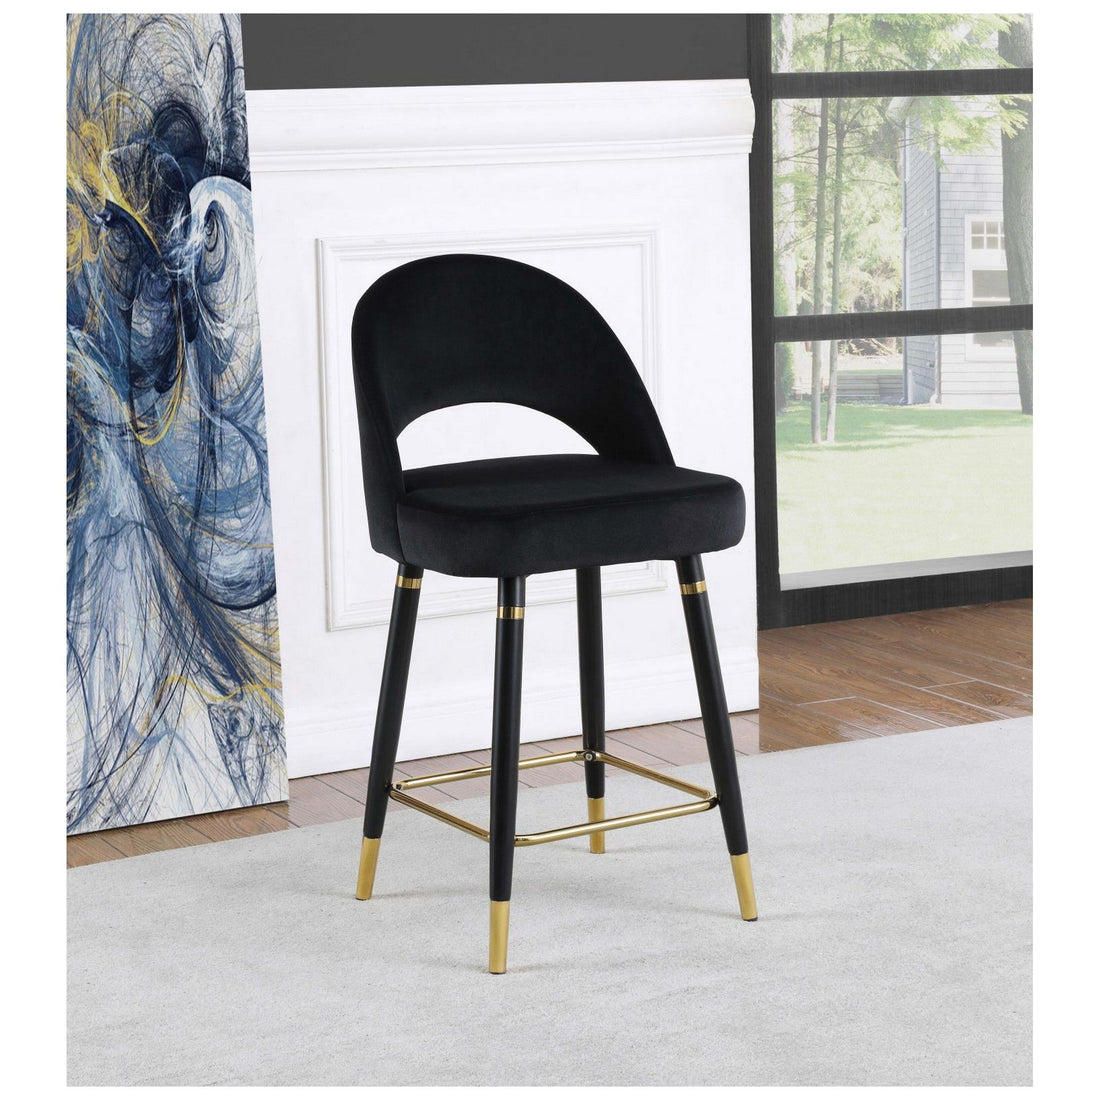 Reyes Arched Back Upholstered Counter Height Stools Black (Set of 2) 193569